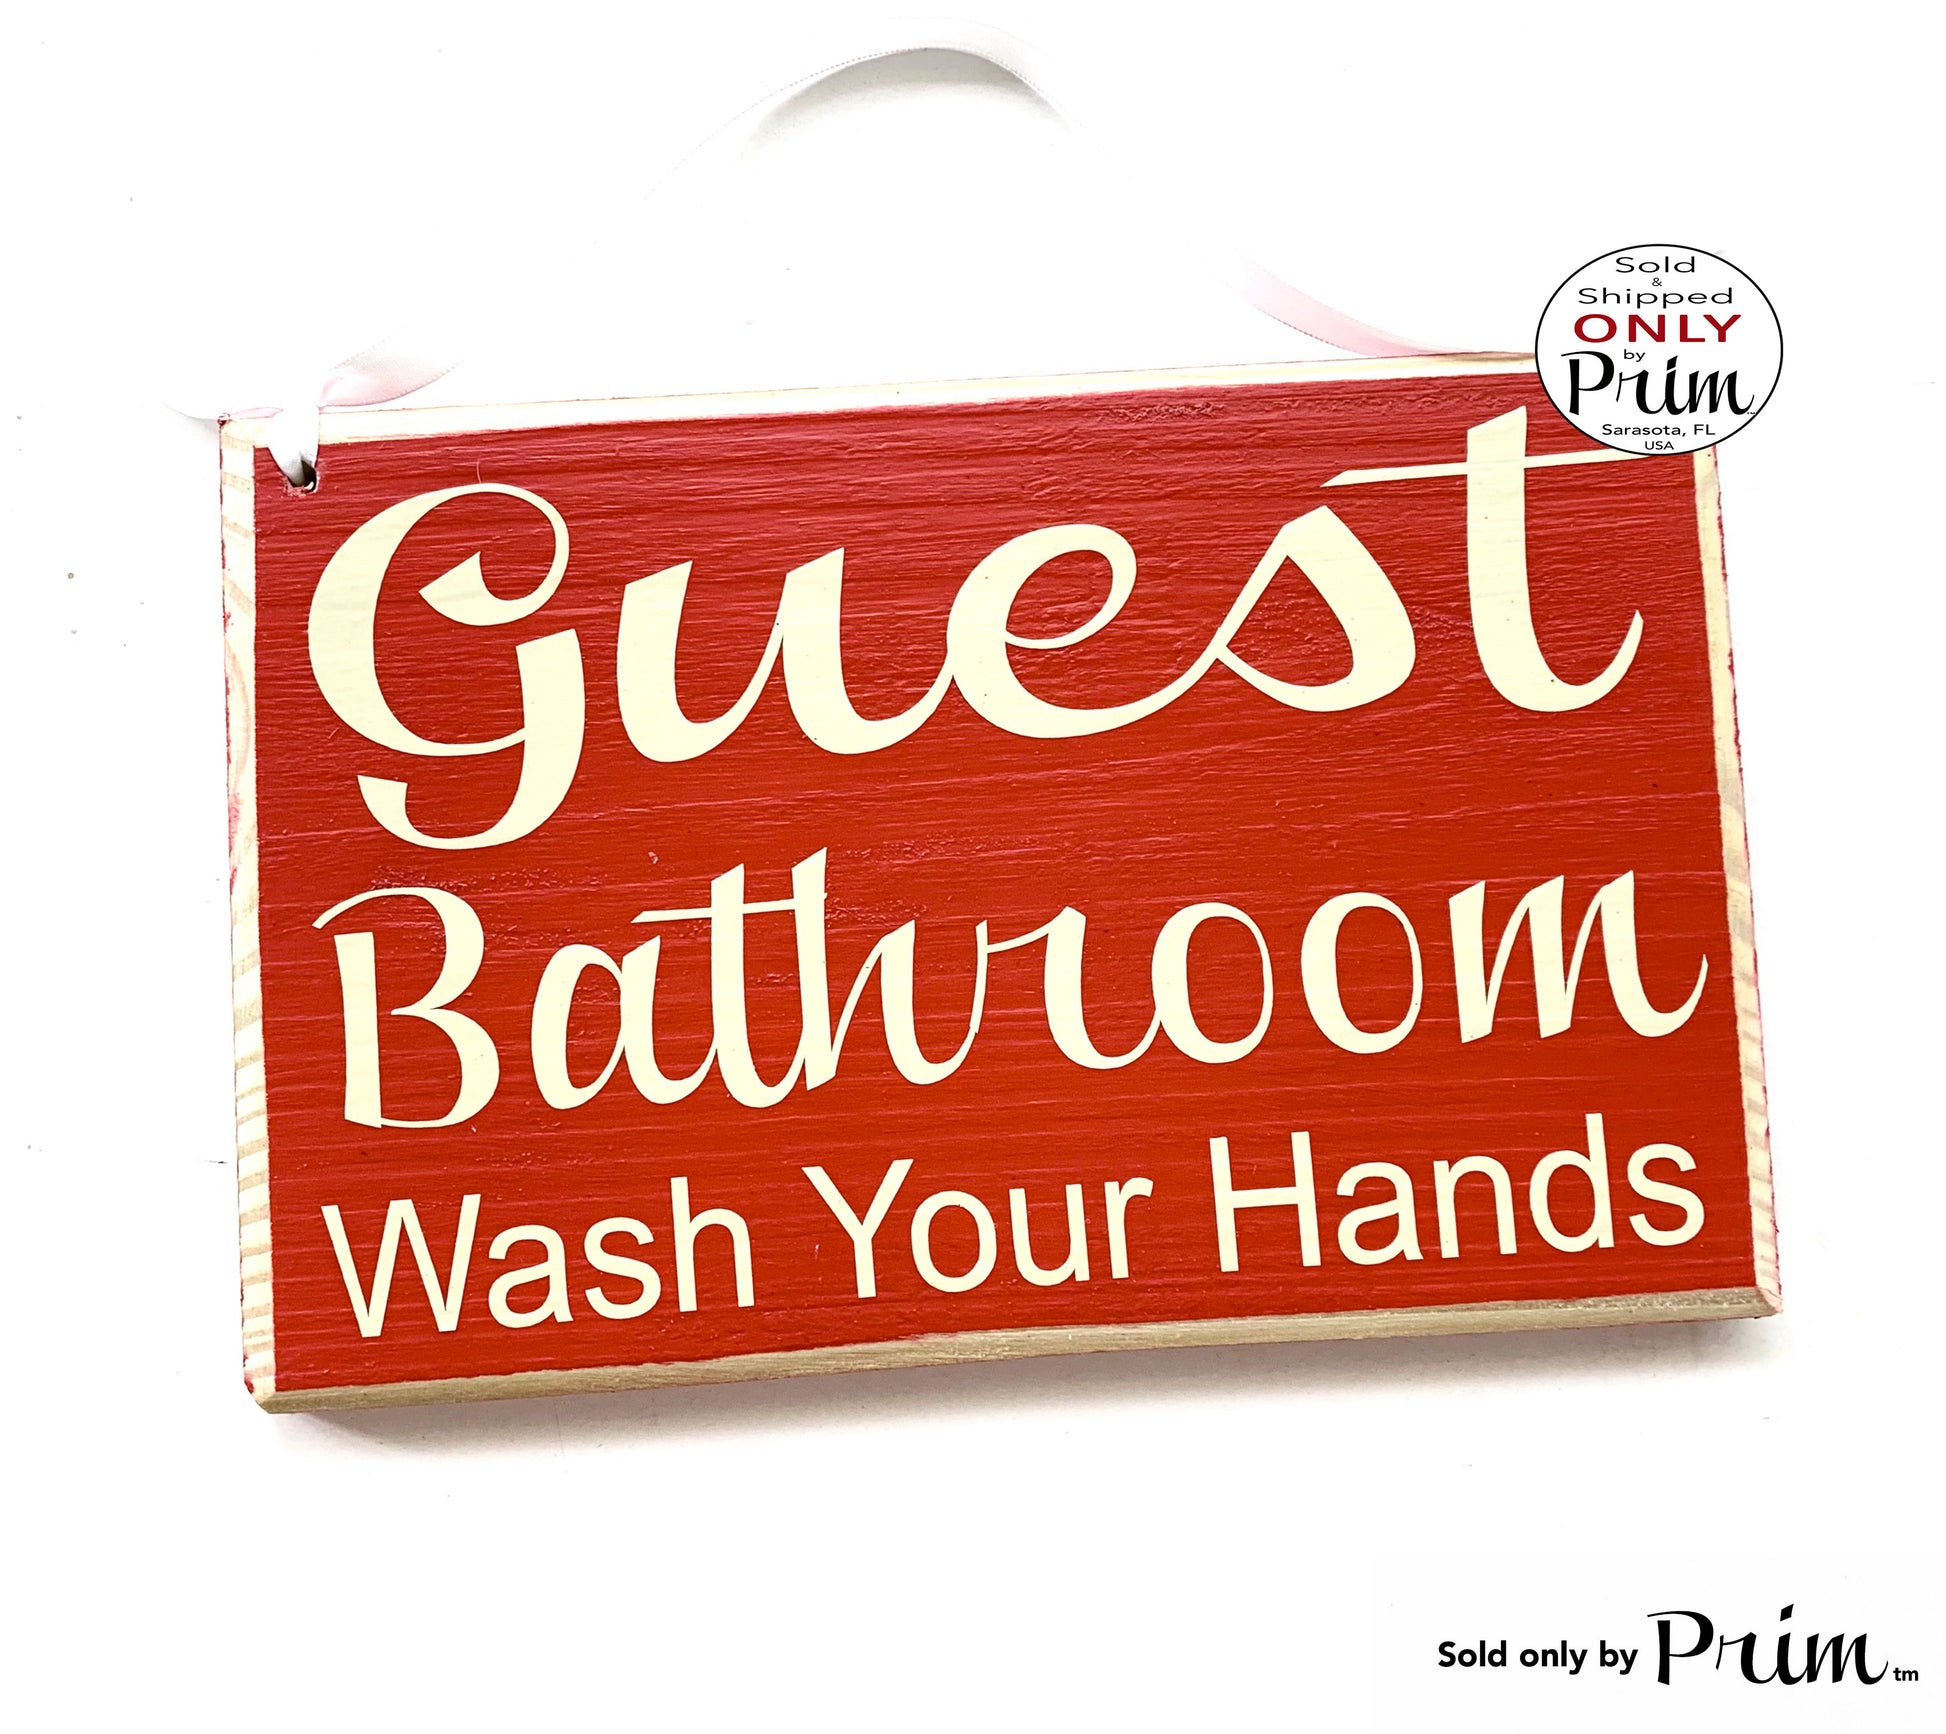 Designs by Prim 8x6 Guest Bathroom Wash Your Hands Custom Wood Sign | Bathroom Restroom Outhouse Washroom airbnb Bed and Breakdast Inn Hotel Door Plaque